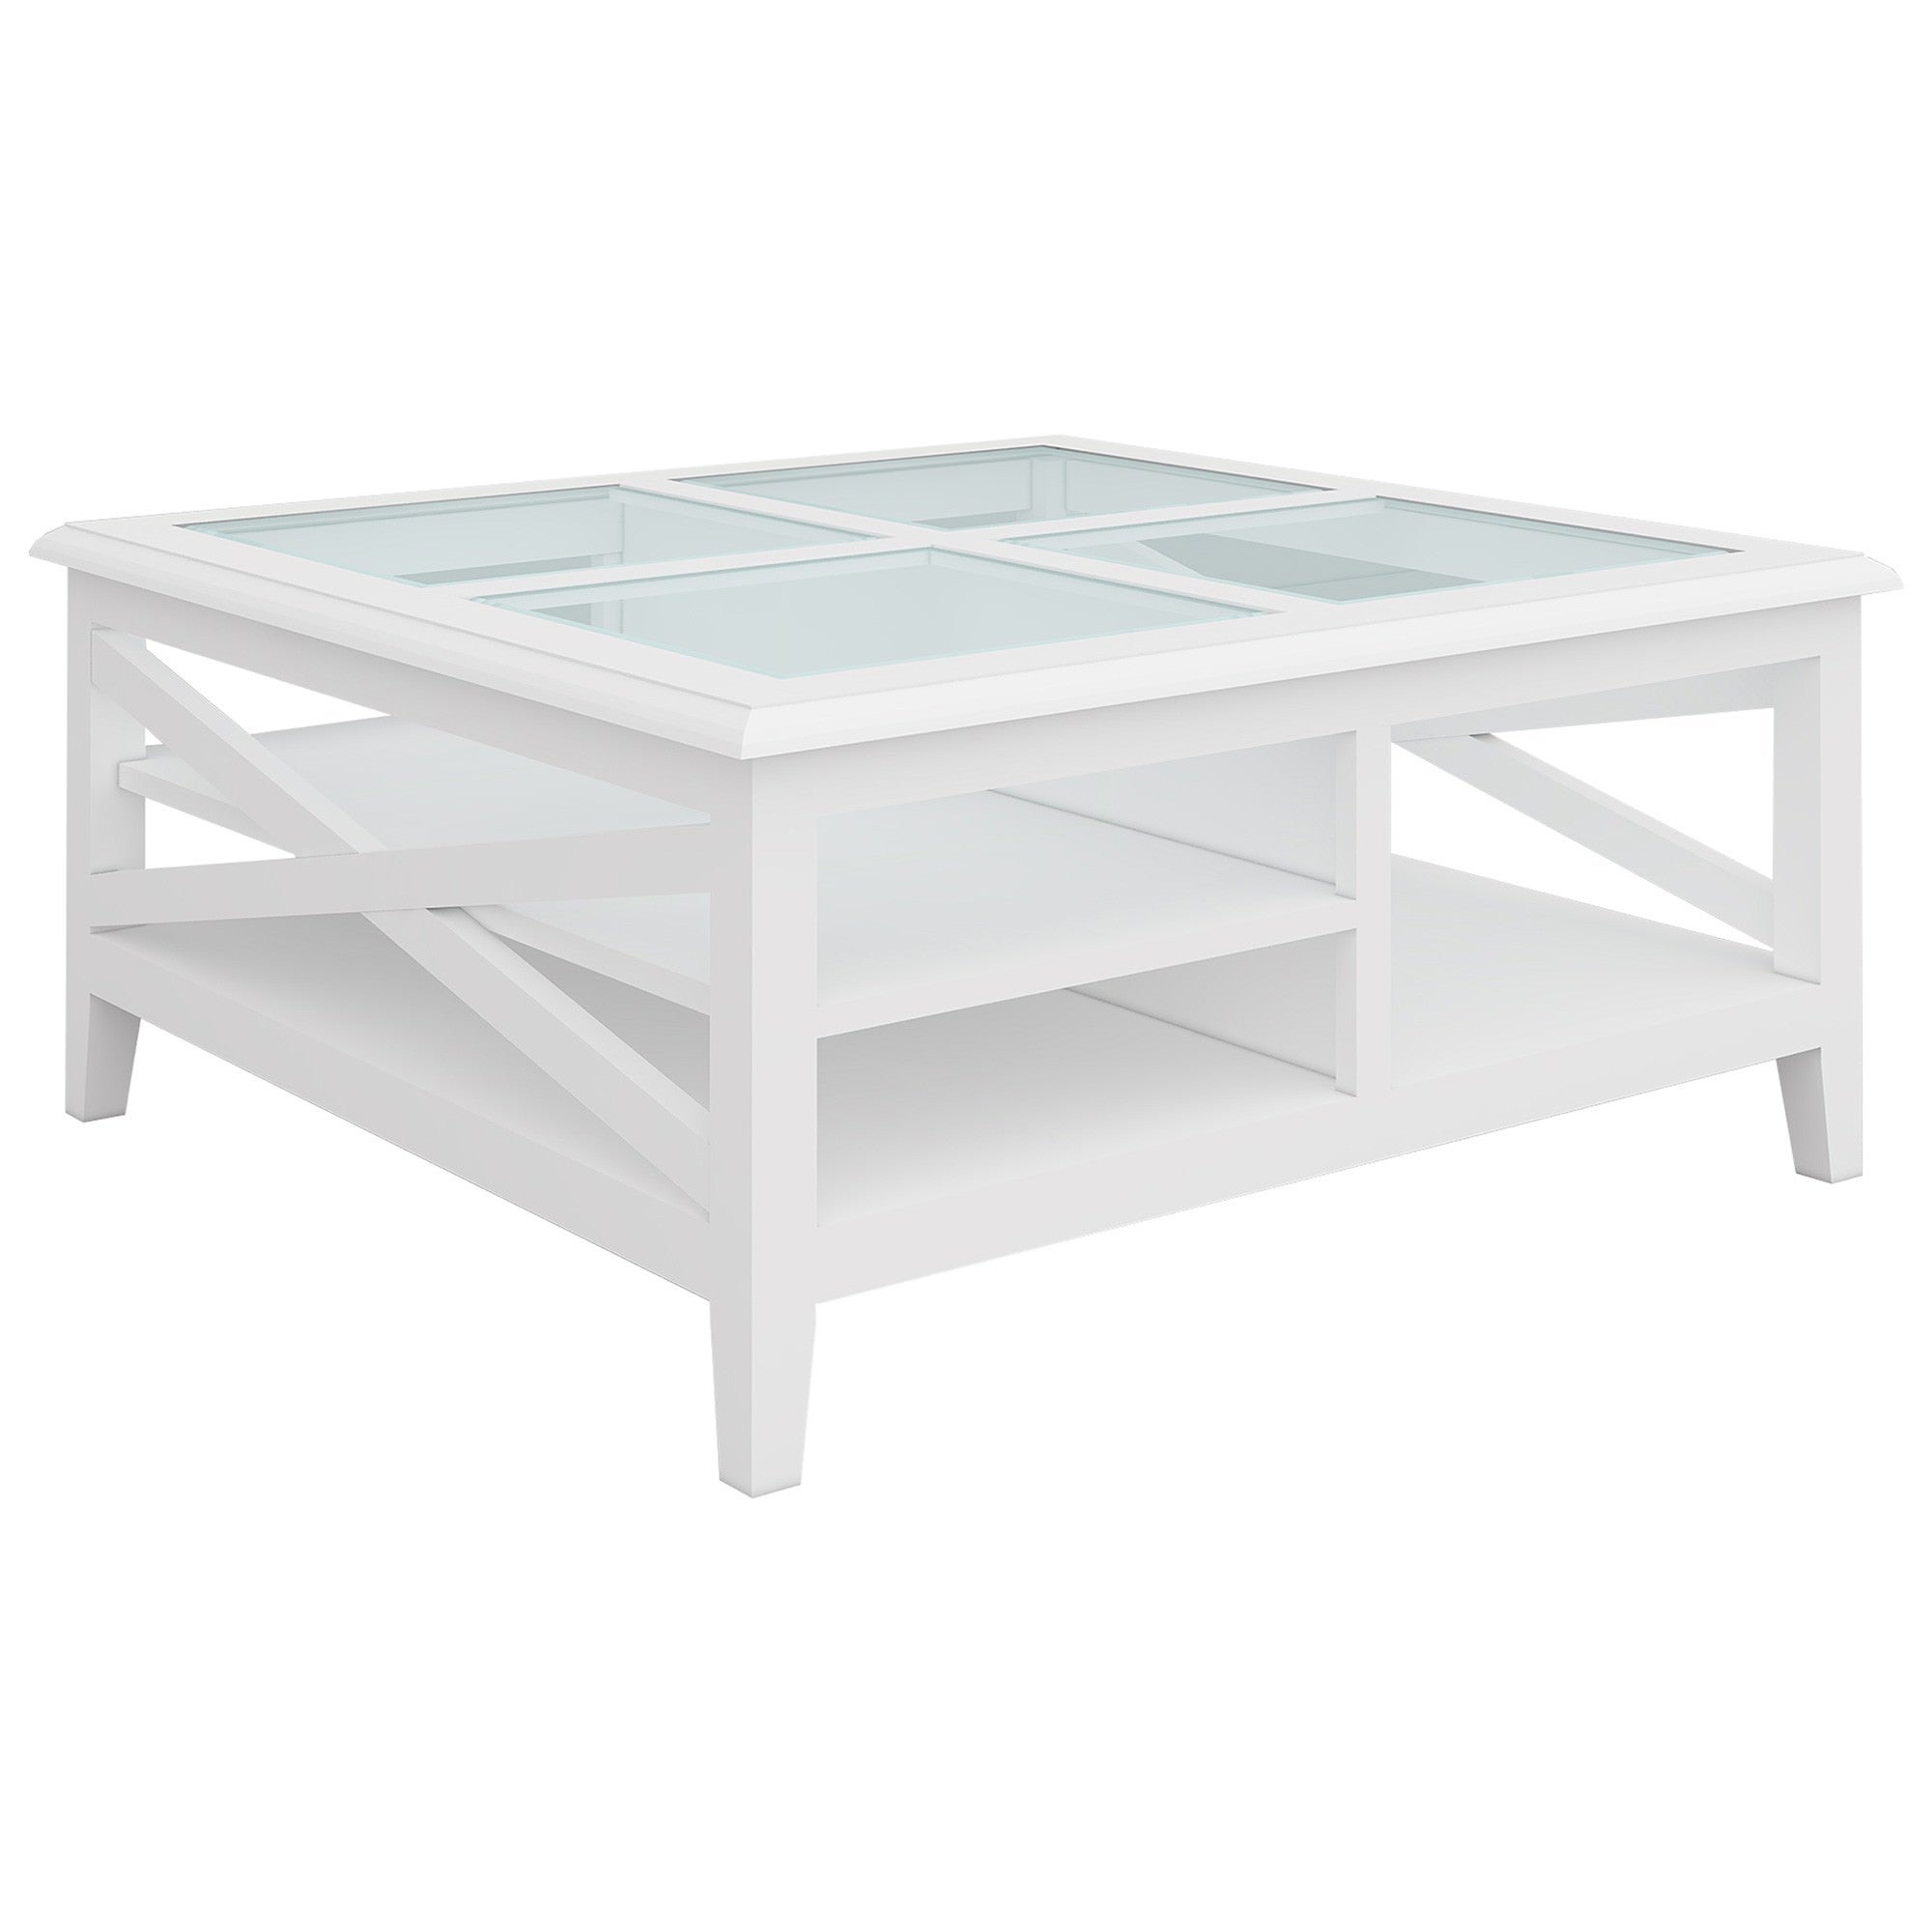 Hastings Glass Top Wooden Square Coffee Table, 100cm